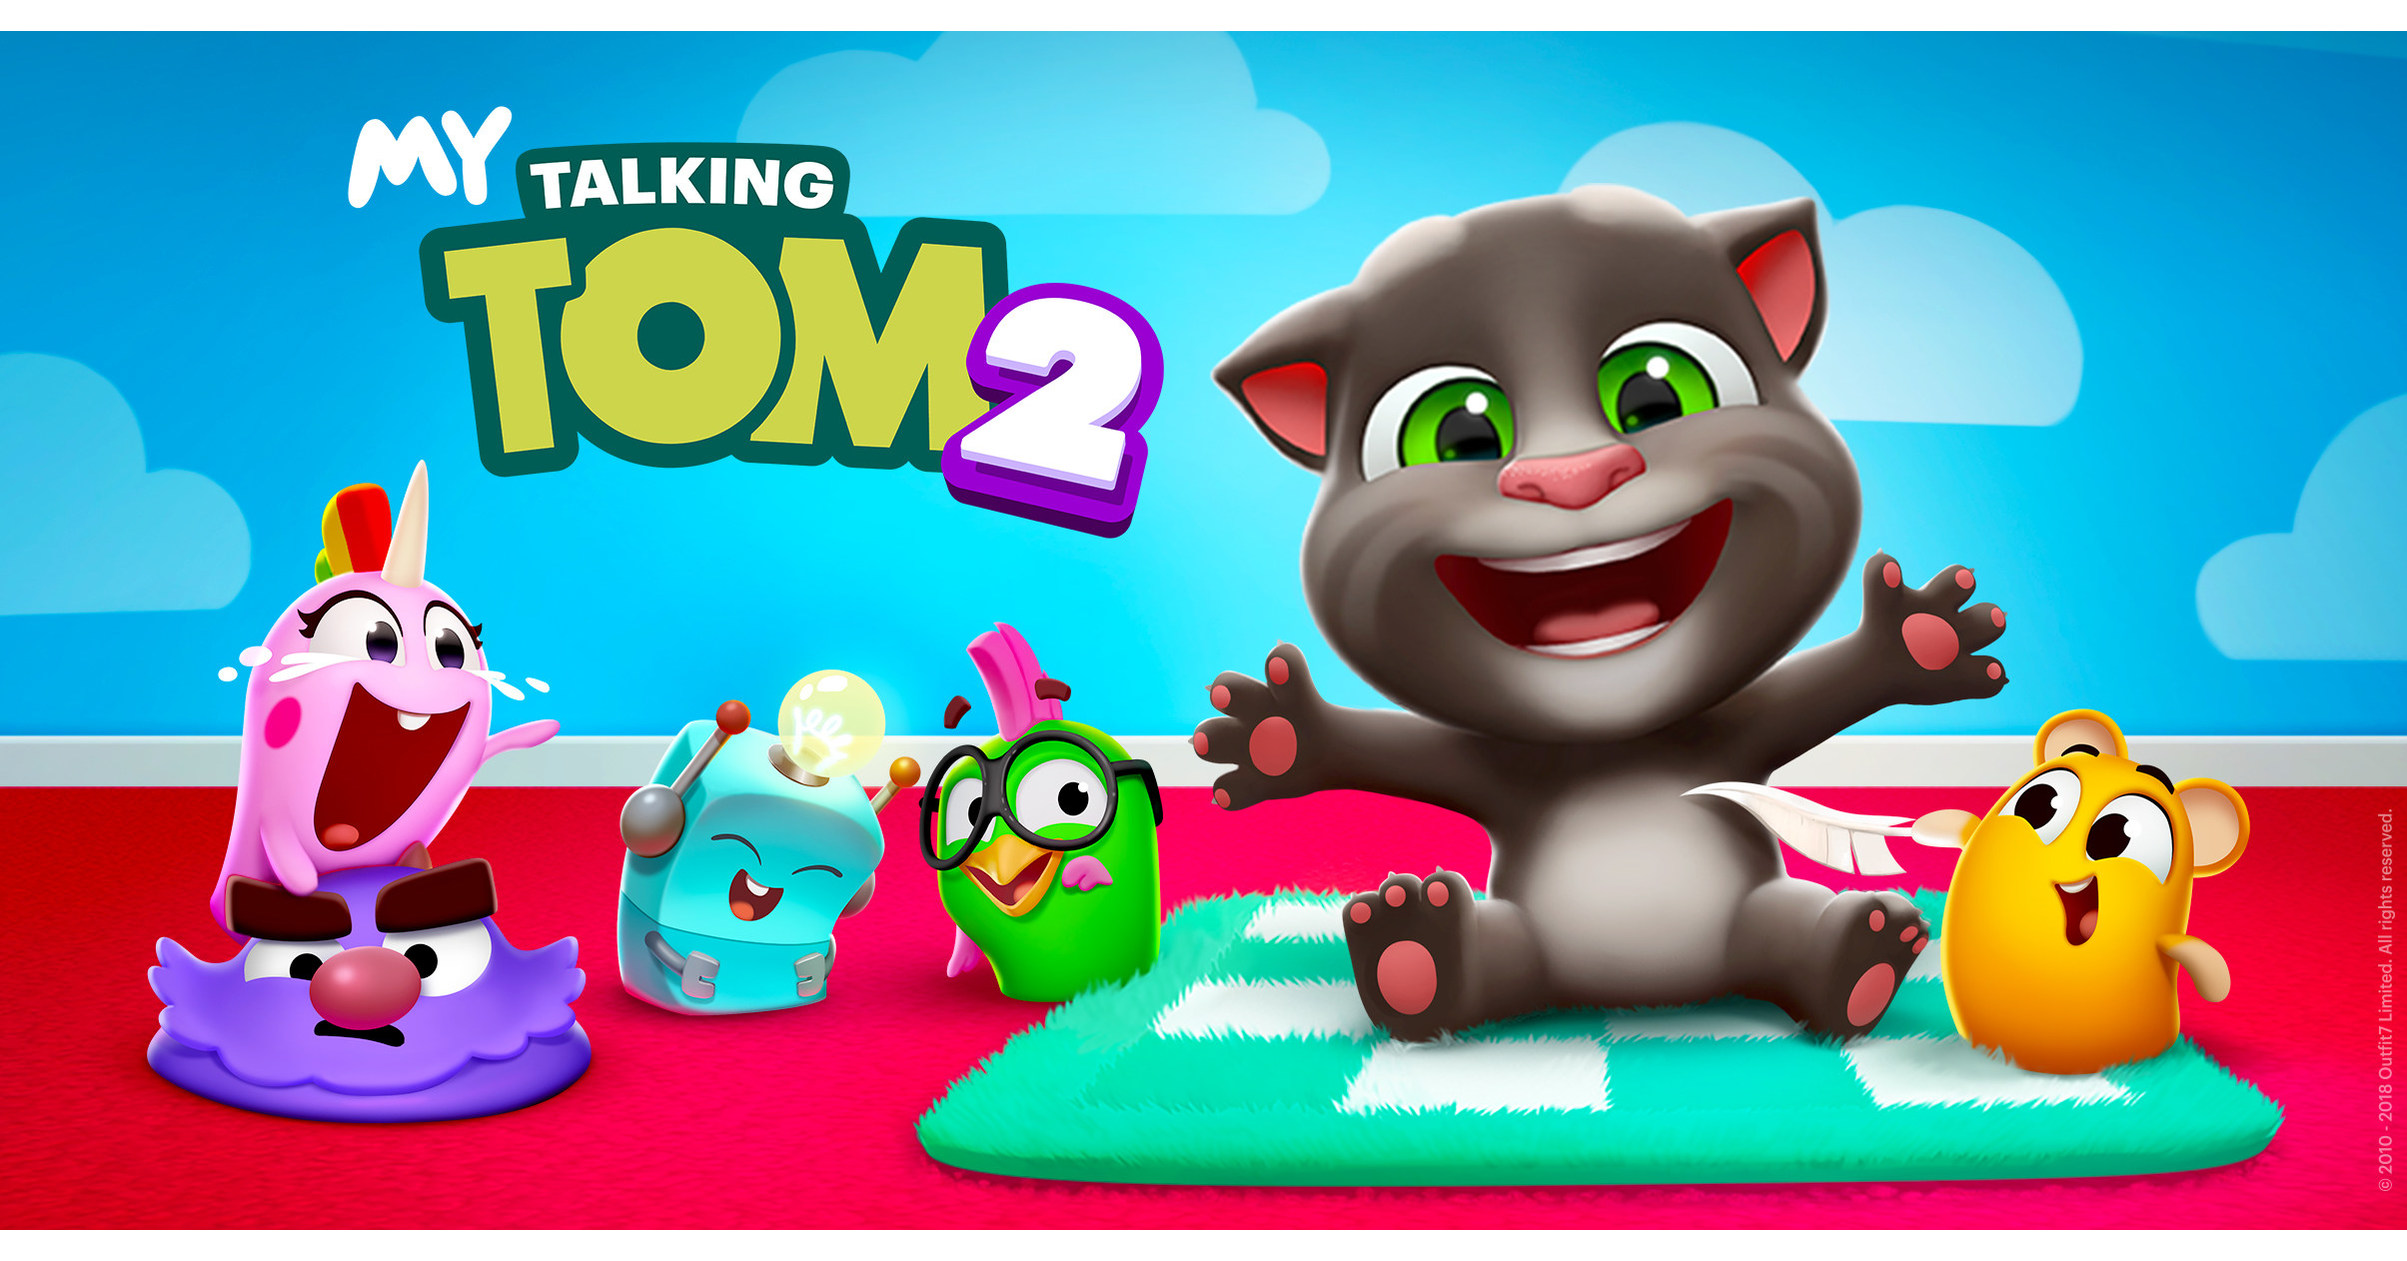 Outfit7 Releases the Most Interactive Virtual Friend Mobile Game Ever - My  Talking Tom 2